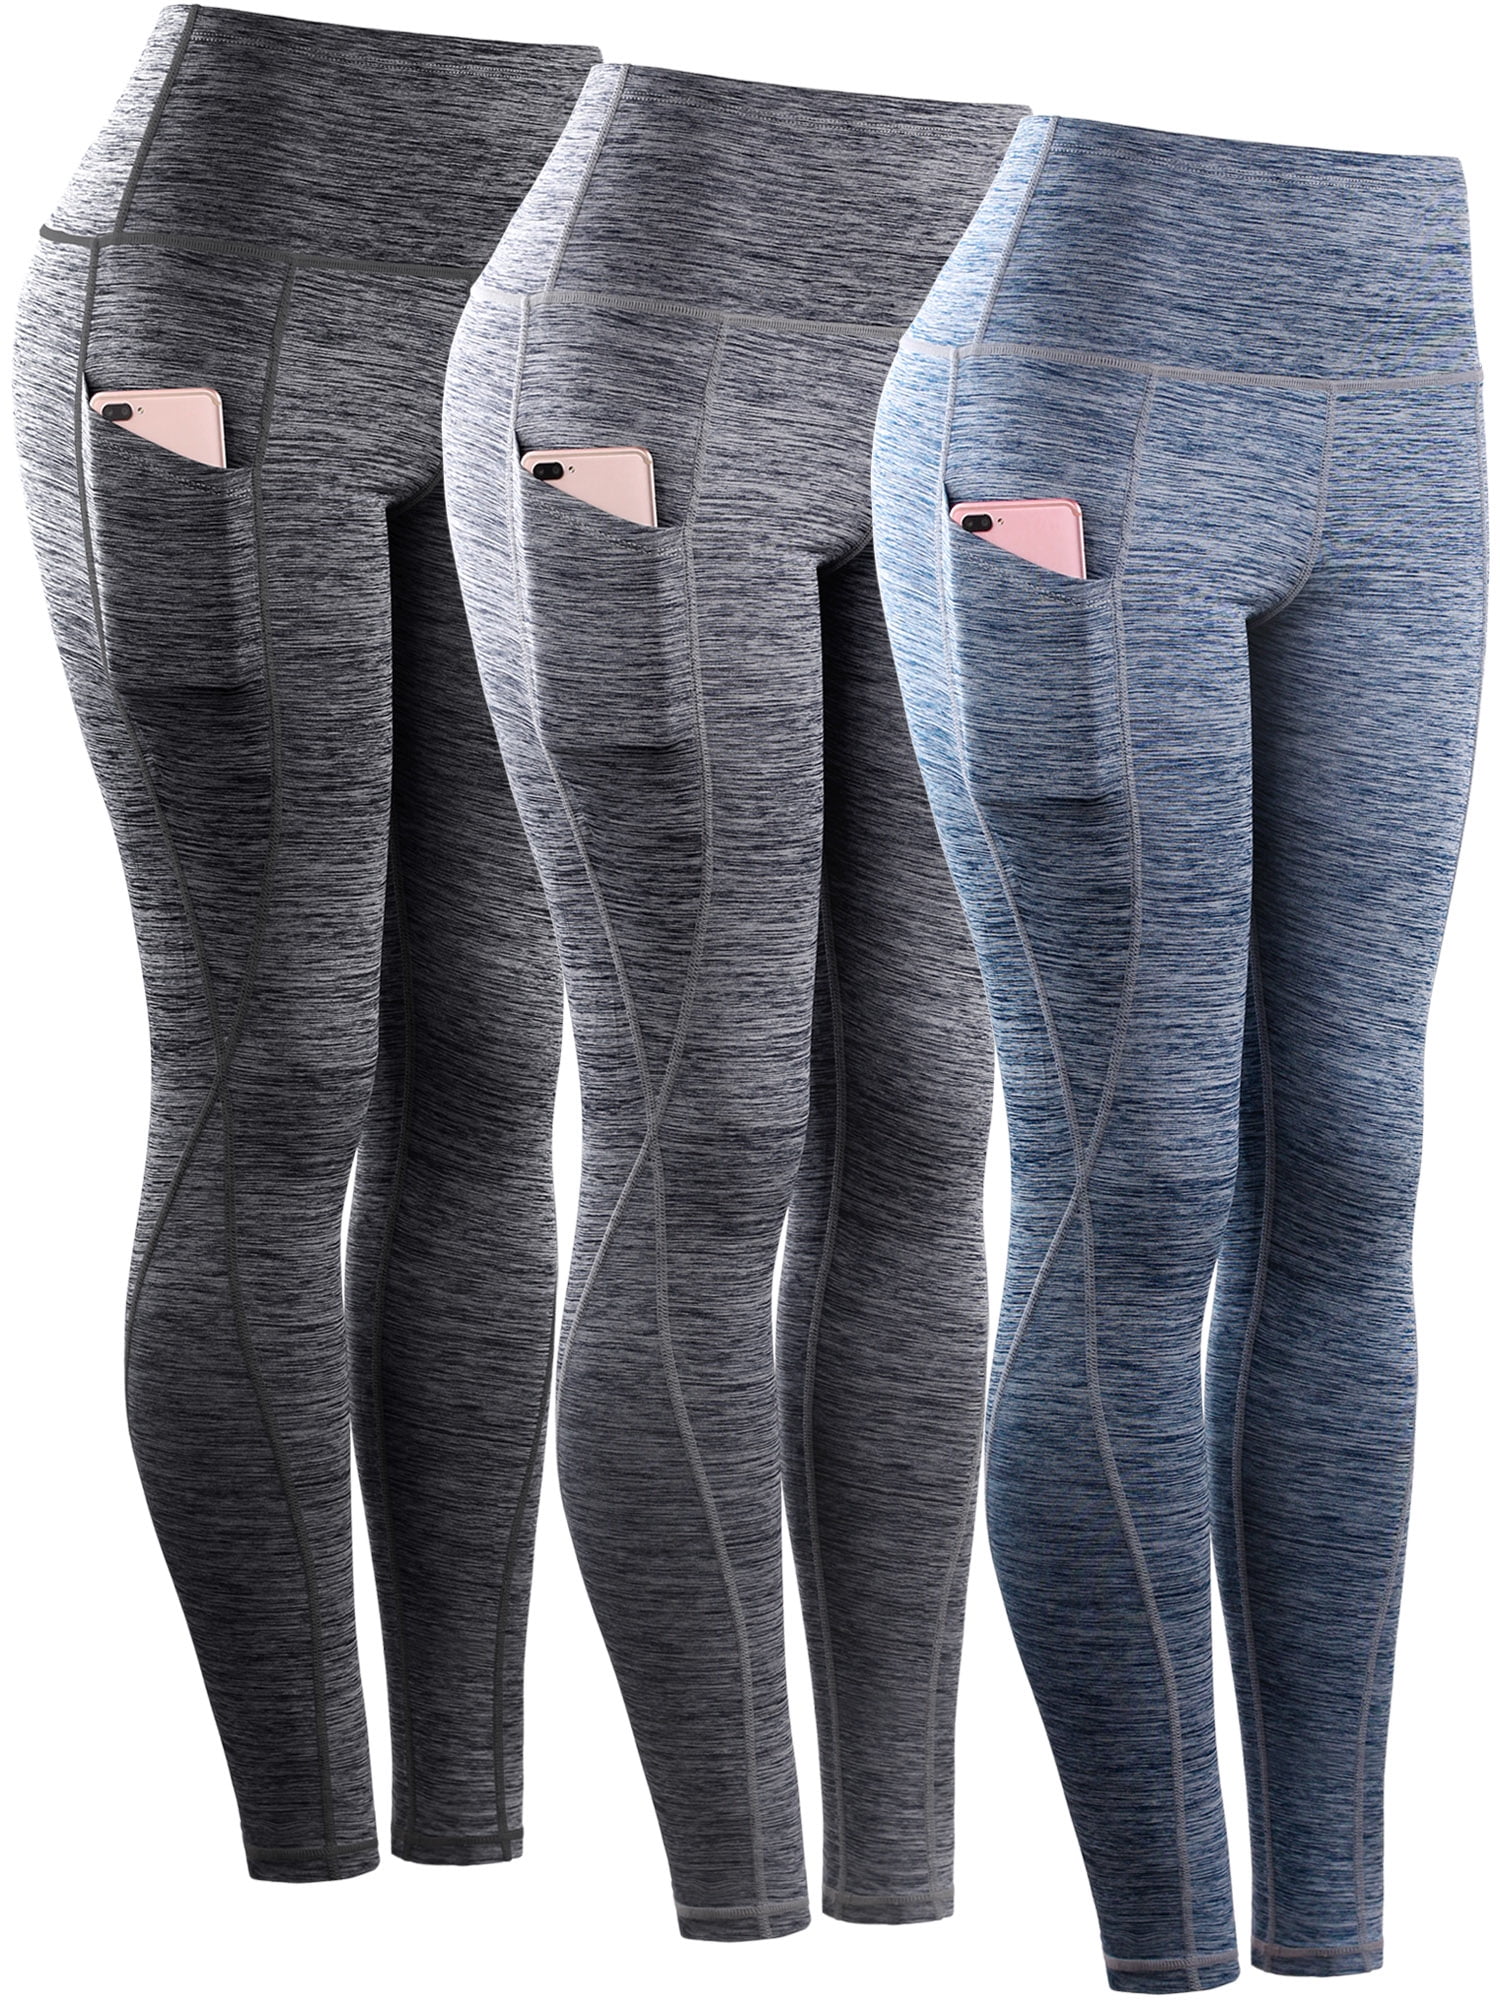 Danskin Now Women's Dri-More Core Athleisure Relaxed Fit Yoga